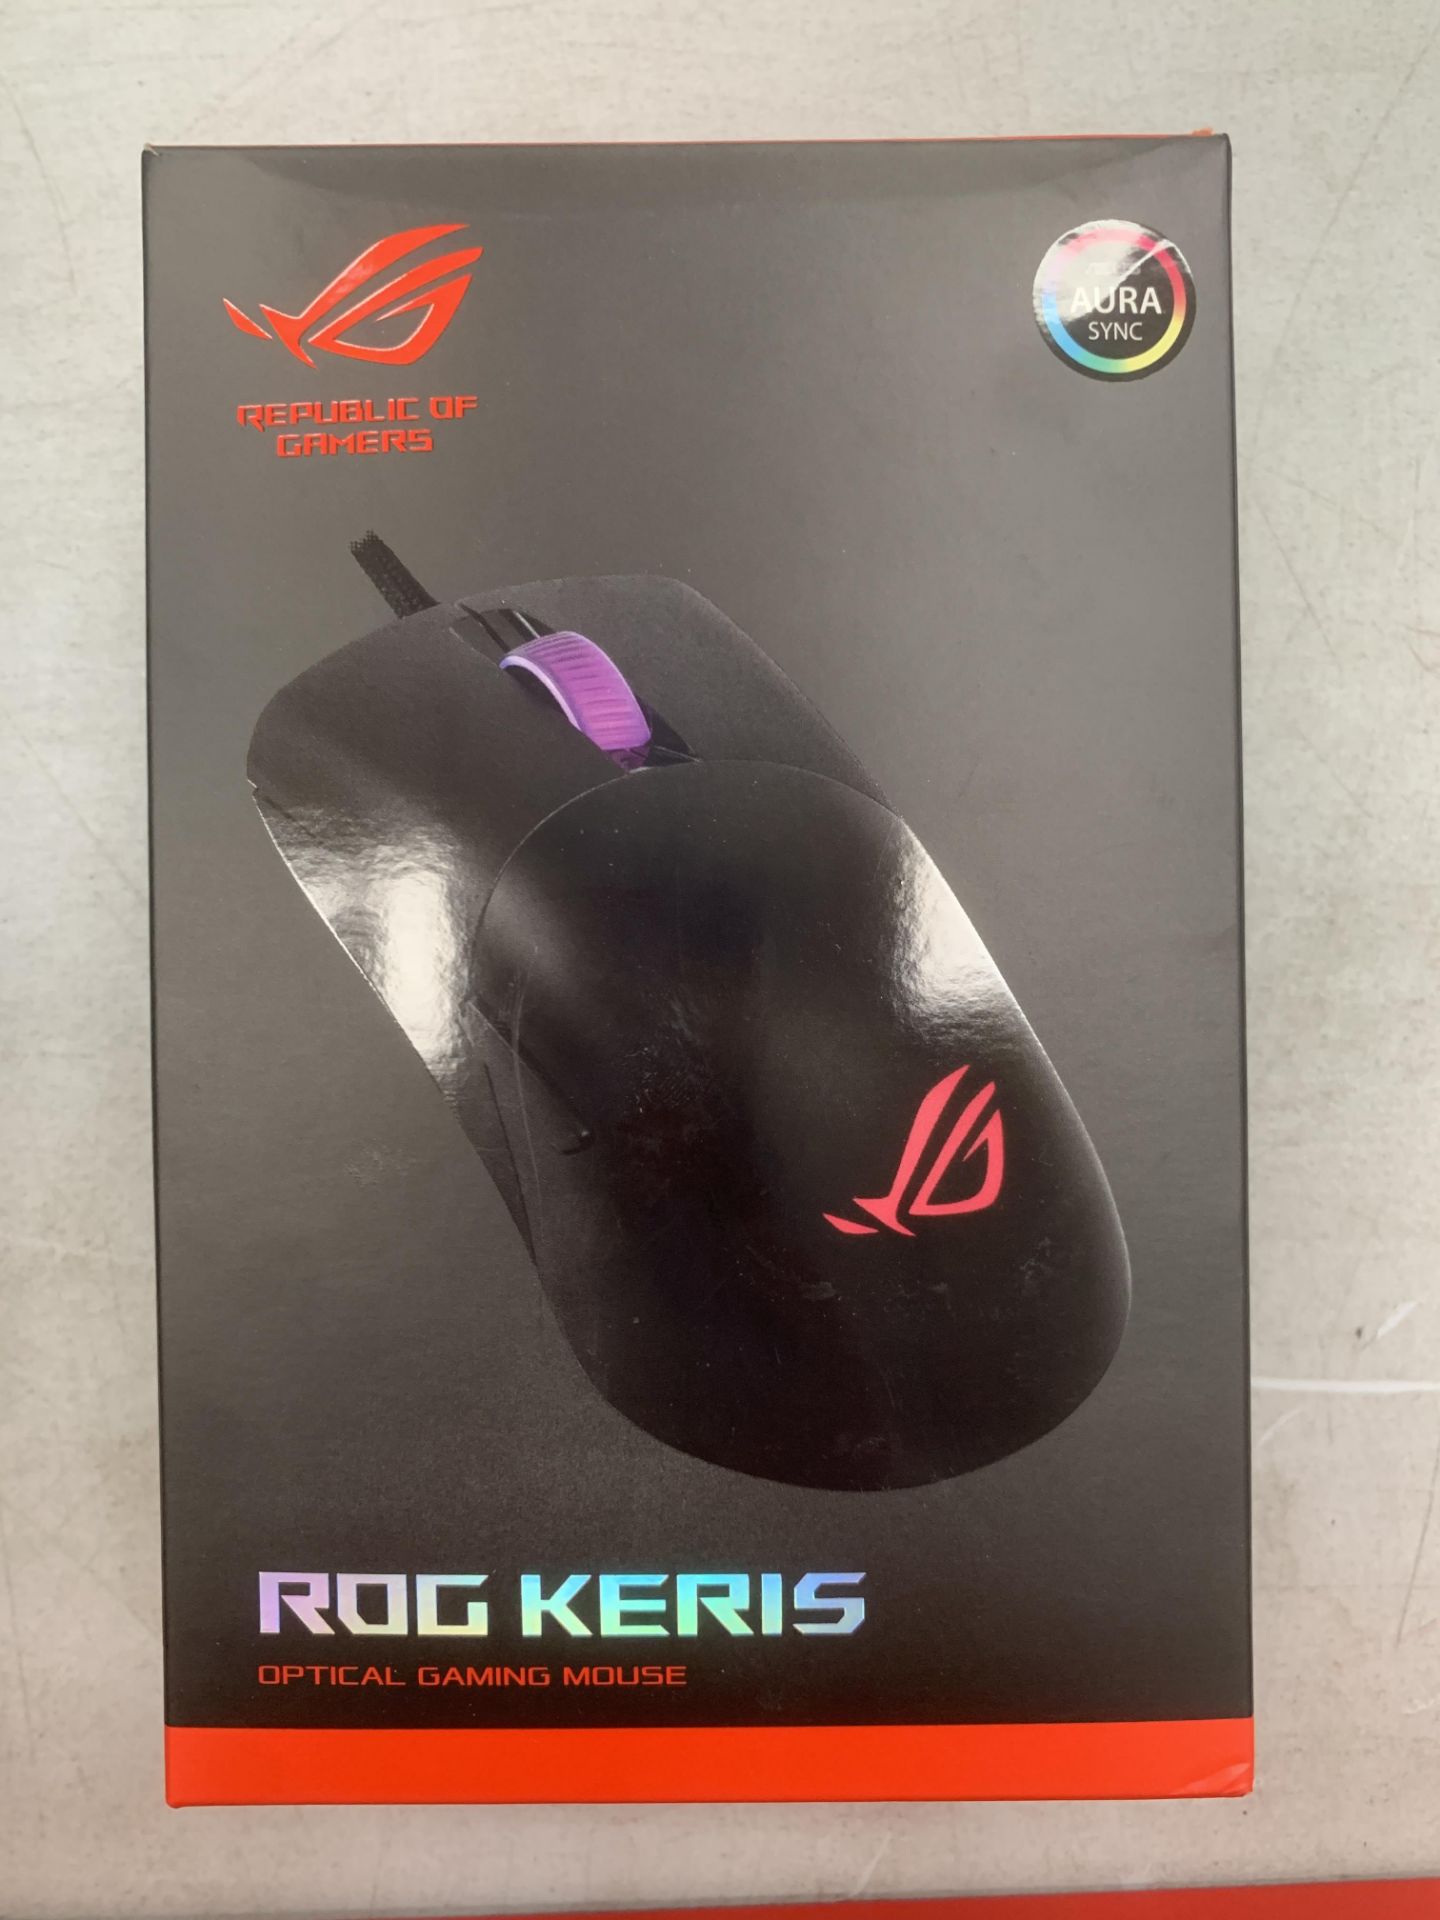 Asus Republic of Gamers Mouse, Keyboard, Desk Sheath and headset - all boxed - Image 4 of 7